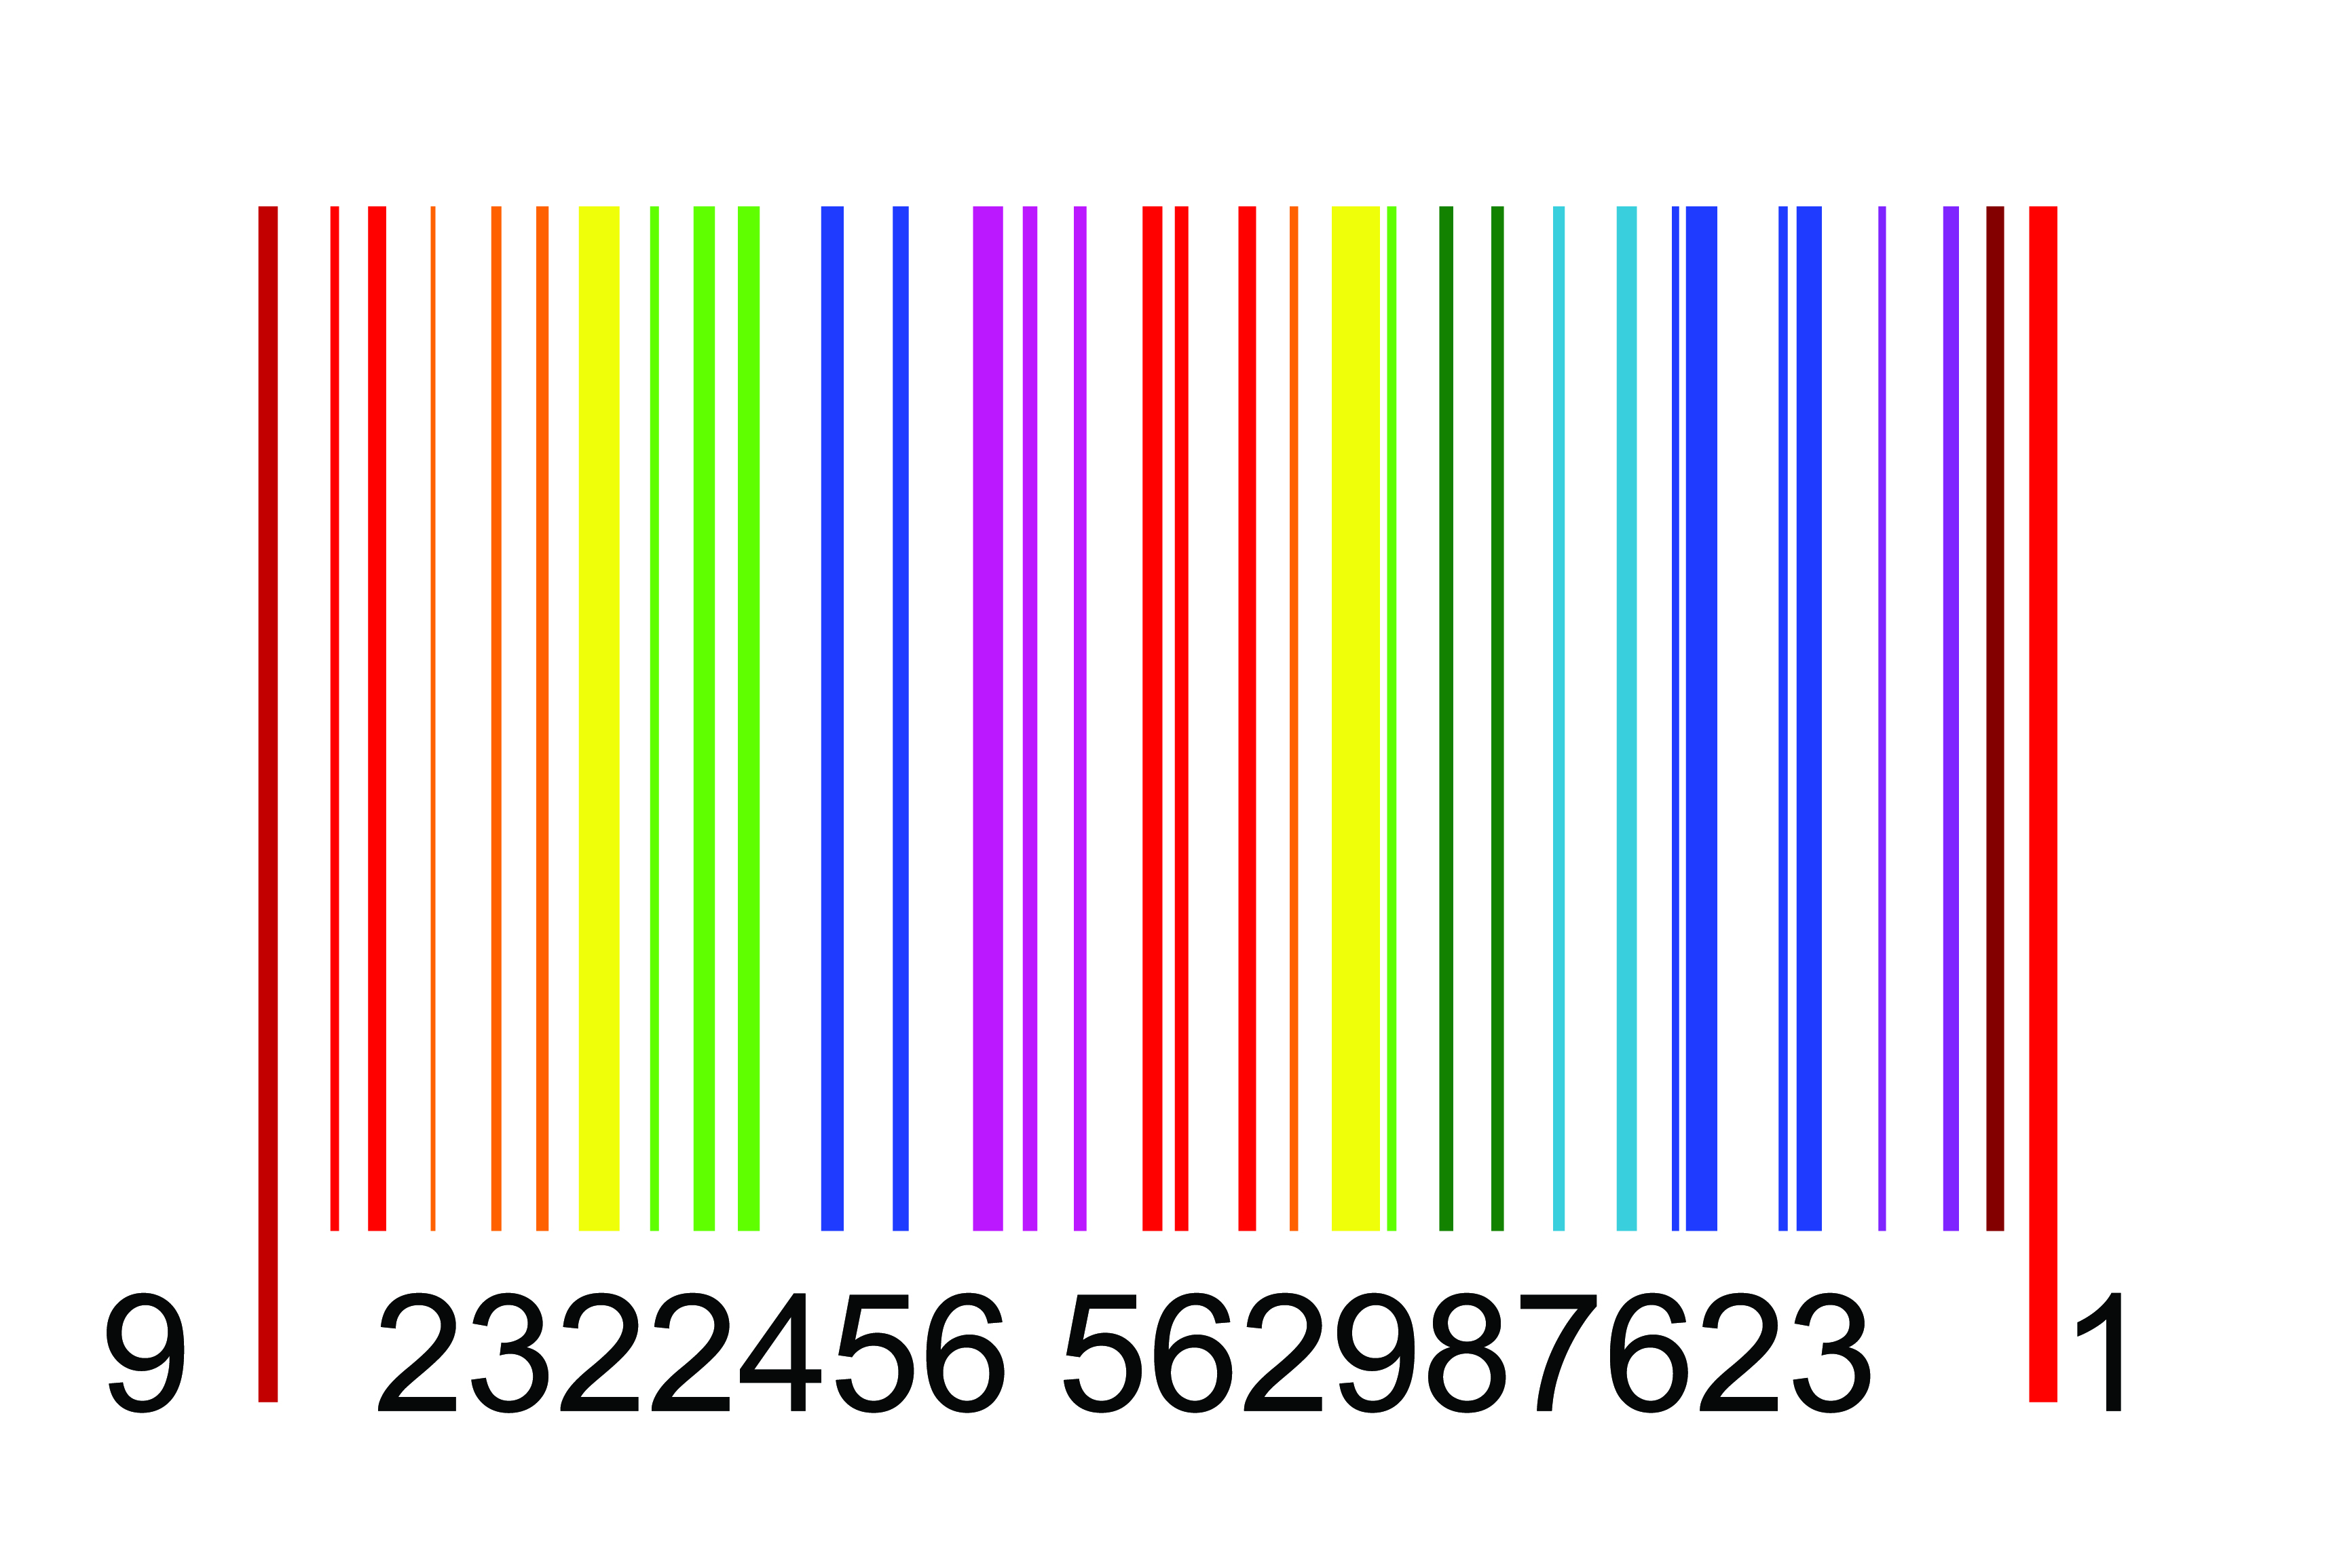 Colorful barcode graphics vector Free Vector / 4Vector